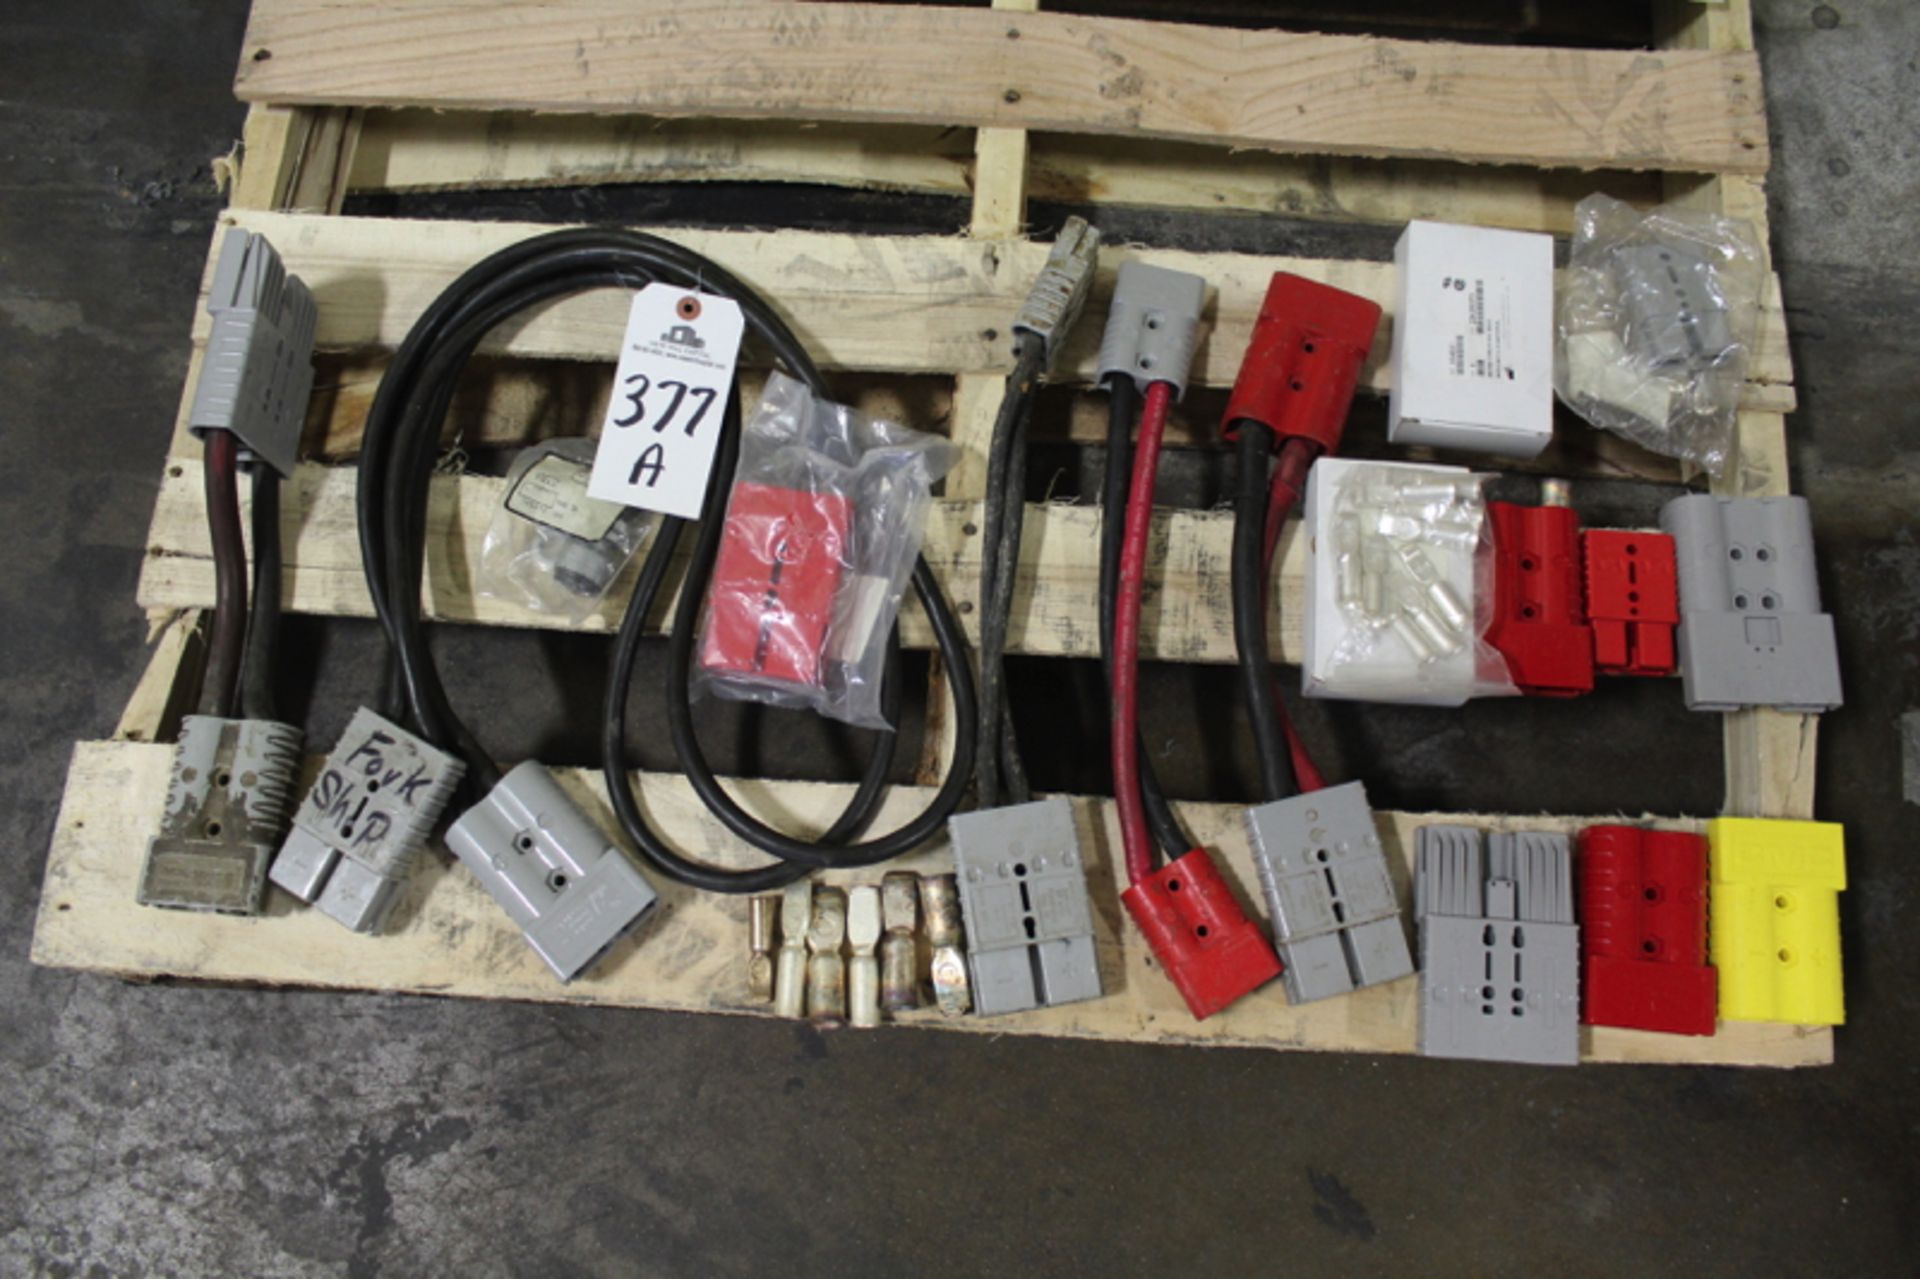 Lot of Charger Adapters & Plugs | Location: Finished Product Warehouse | Rigging Price: Buyer May